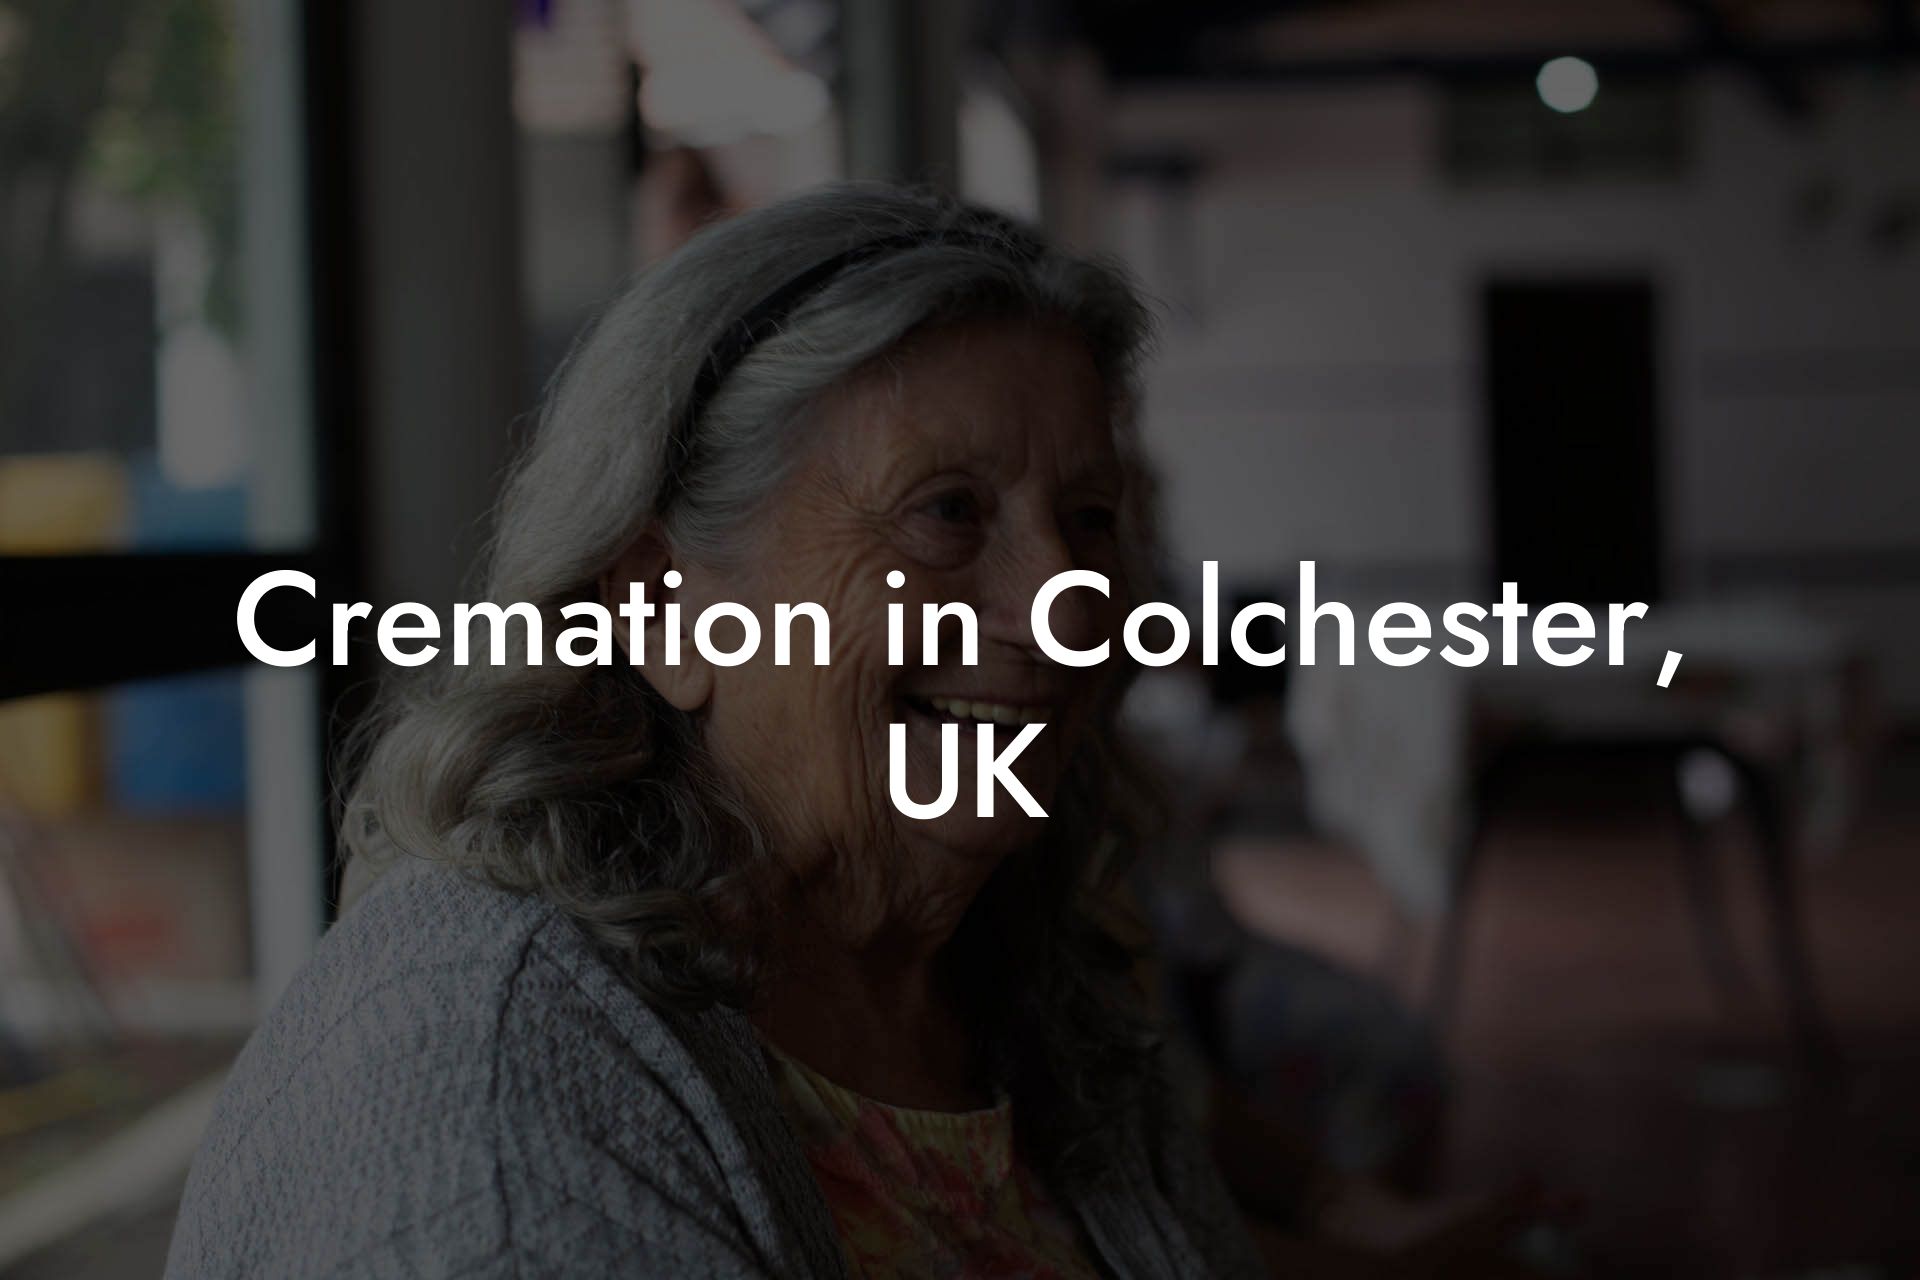 Cremation in Colchester, UK